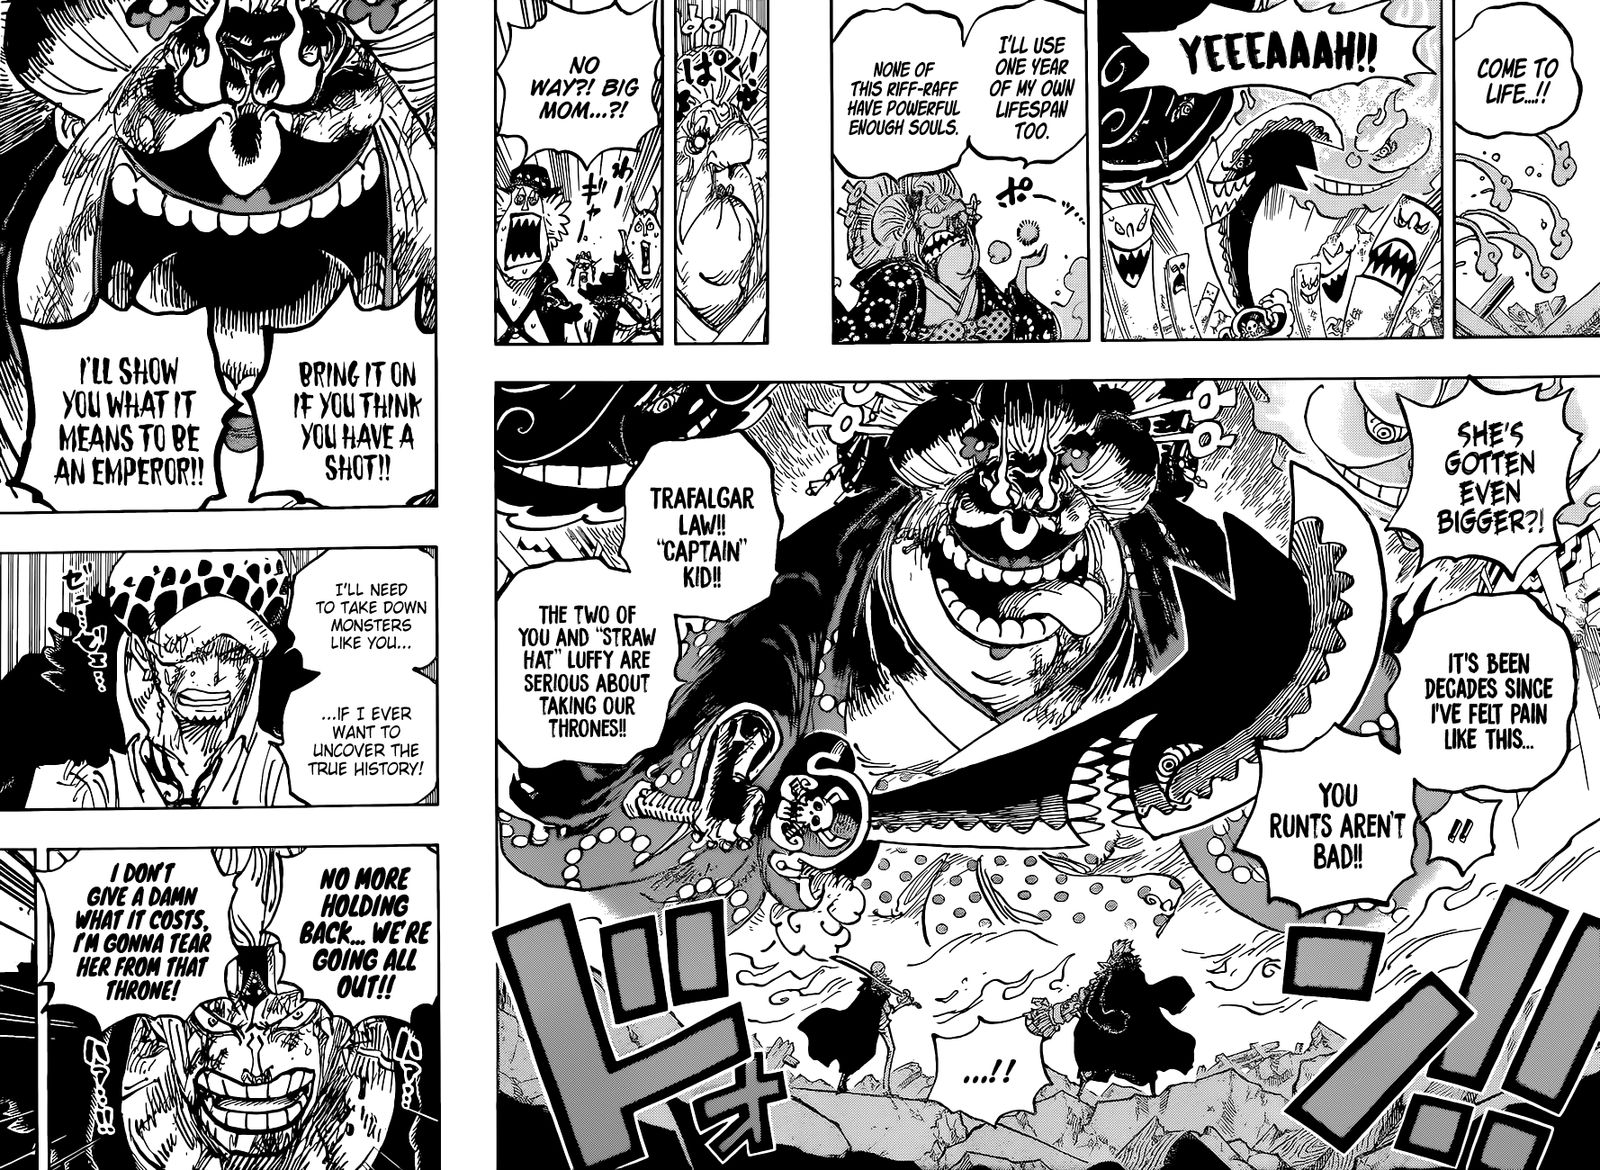 Chapter 1031, One Piece Wiki